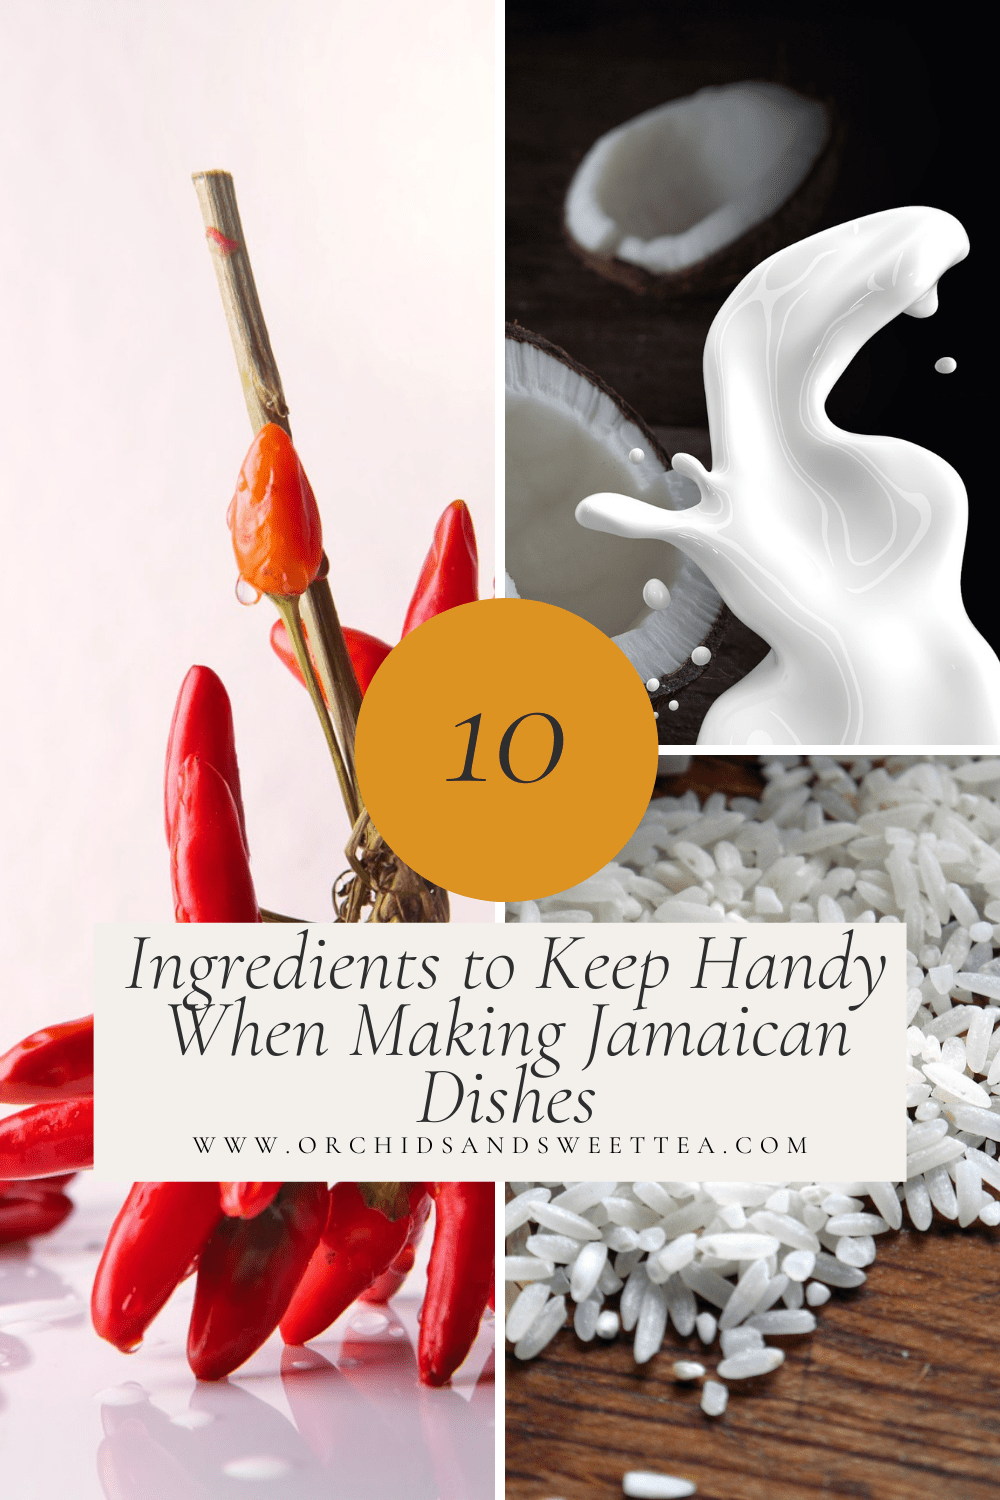 10 Ingredients to Keep Handy When Making Jamaican Dishes